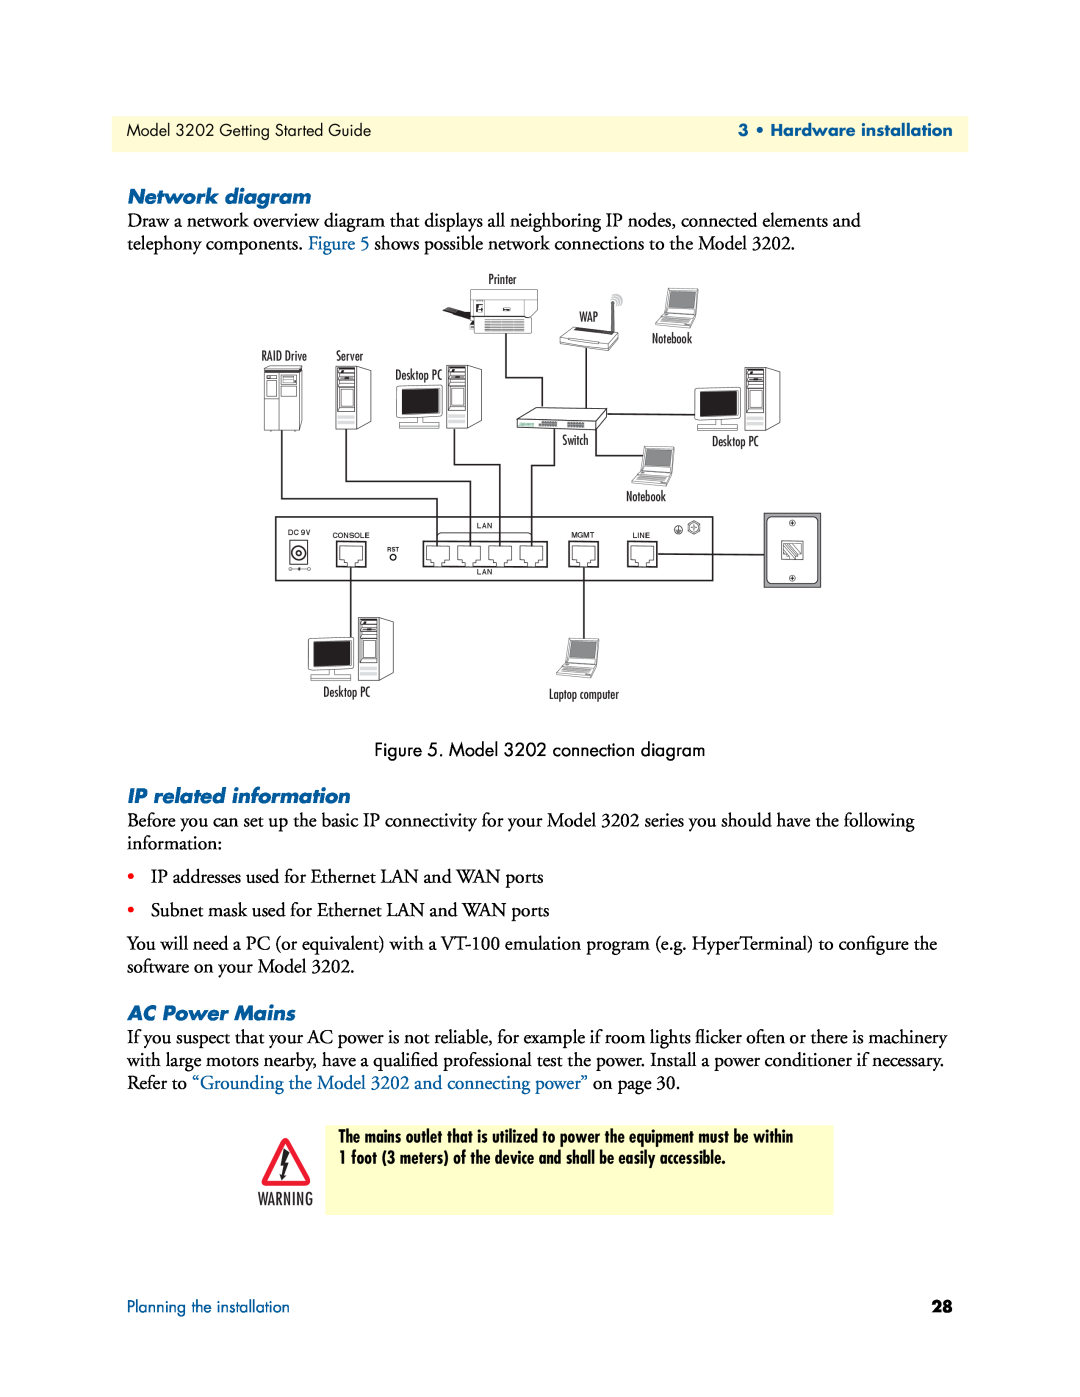 Patton electronic 3202 manual Network diagram, IP related information, AC Power Mains 